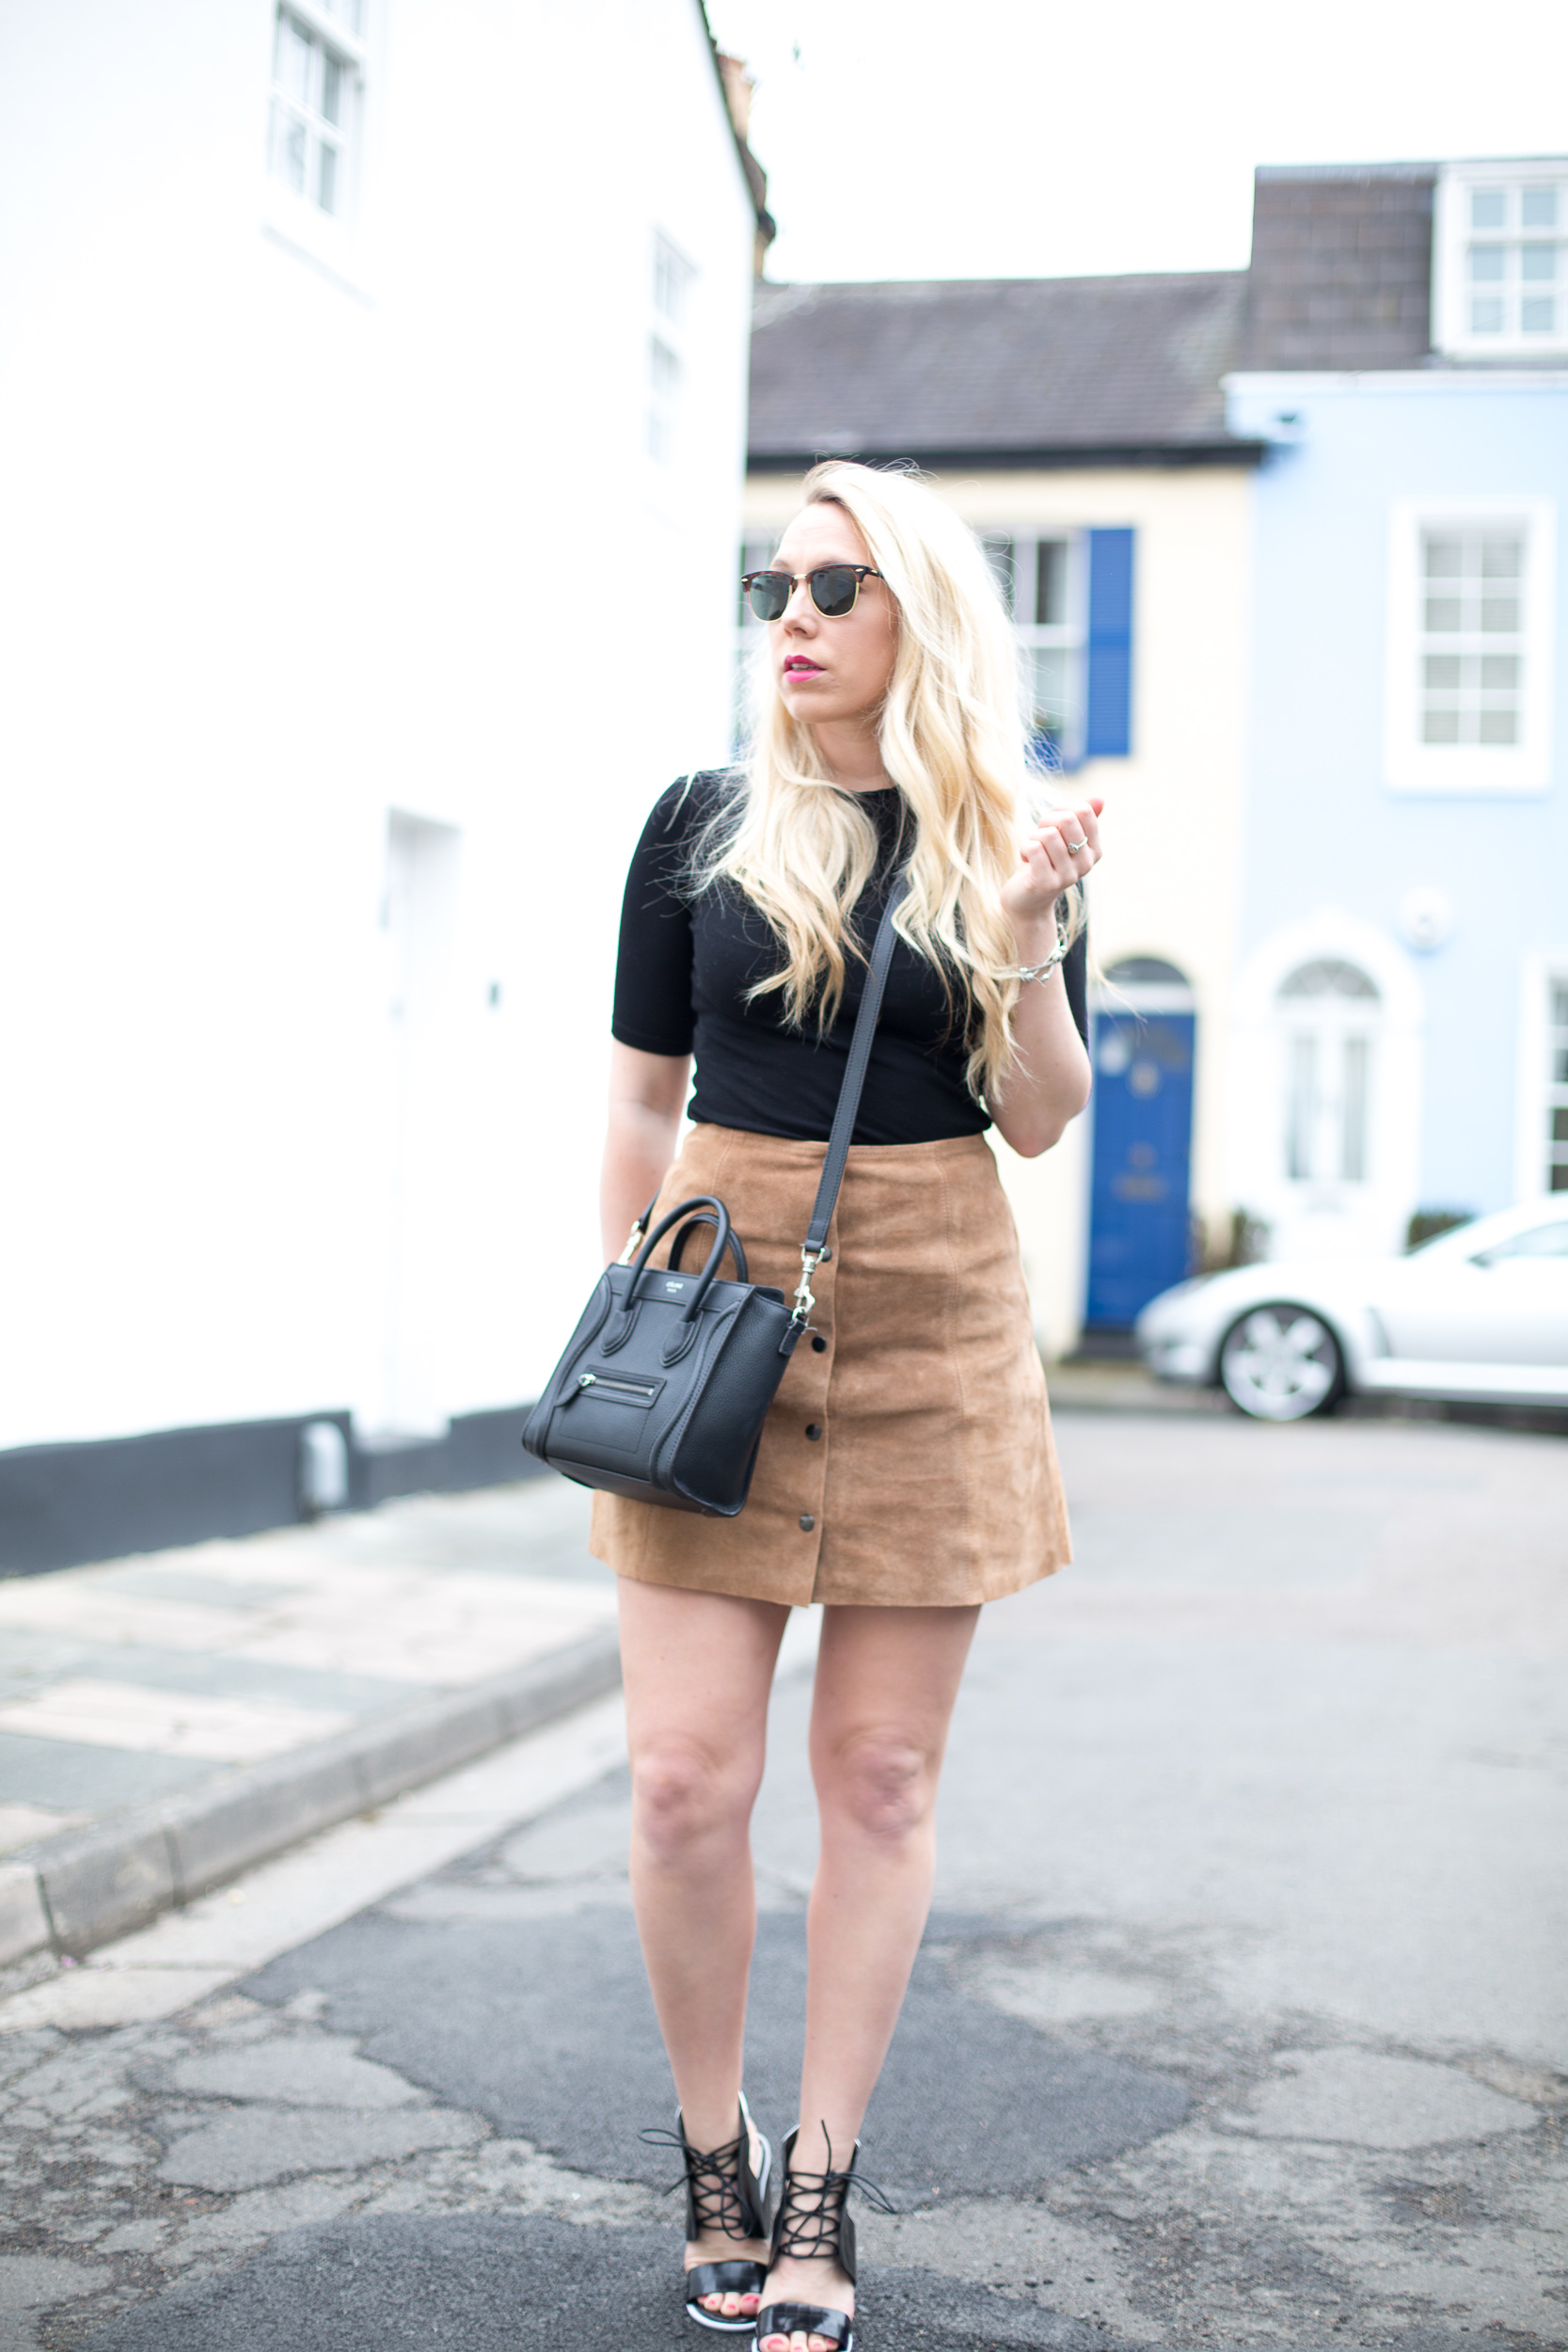 HOW TO WEAR A SUEDE SKIRT - Mediamarmalade